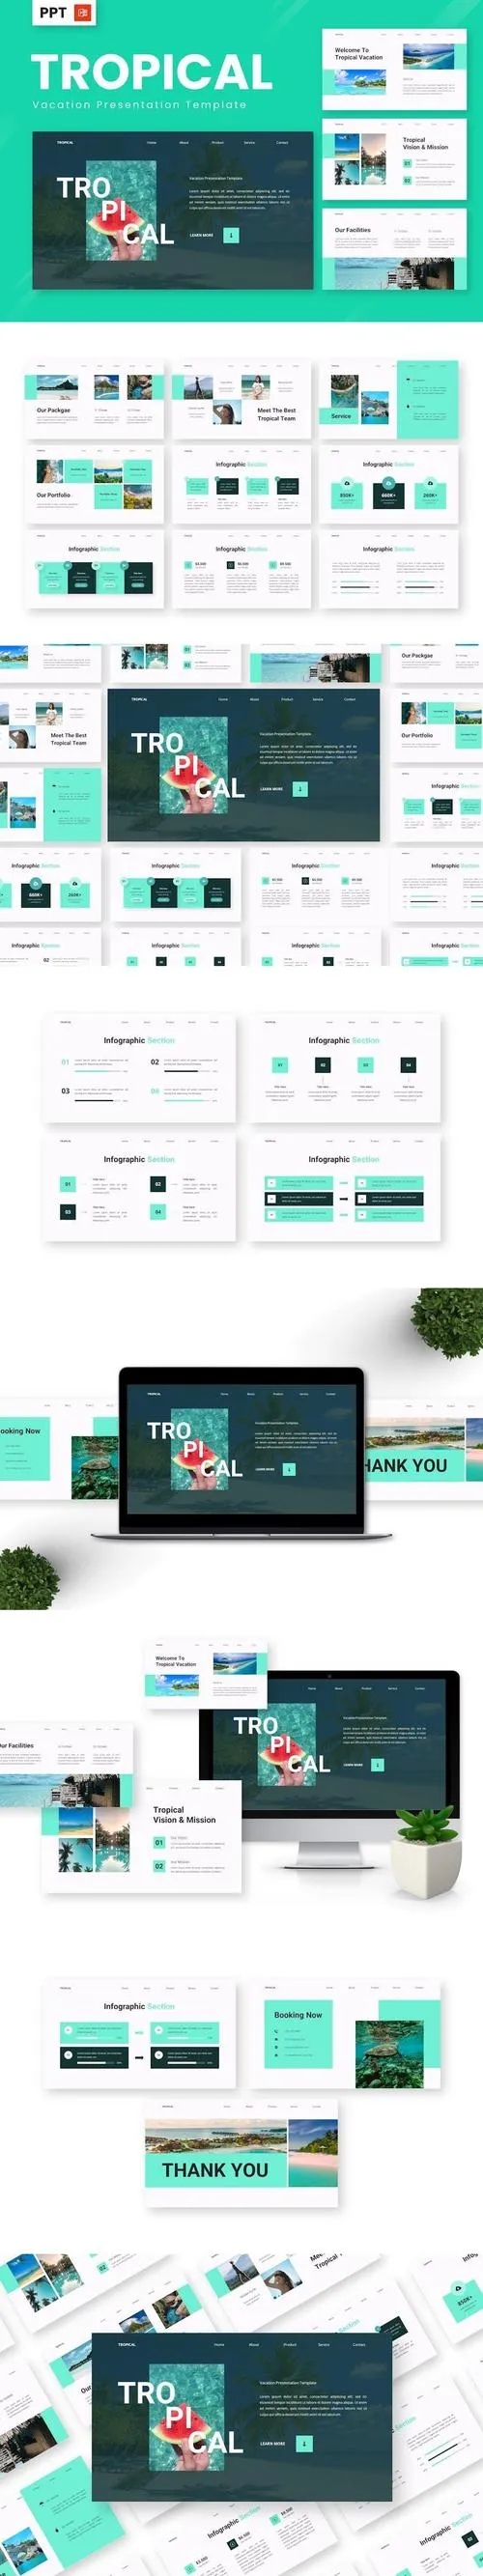 Tropical - Vacation Powerpoint Templates